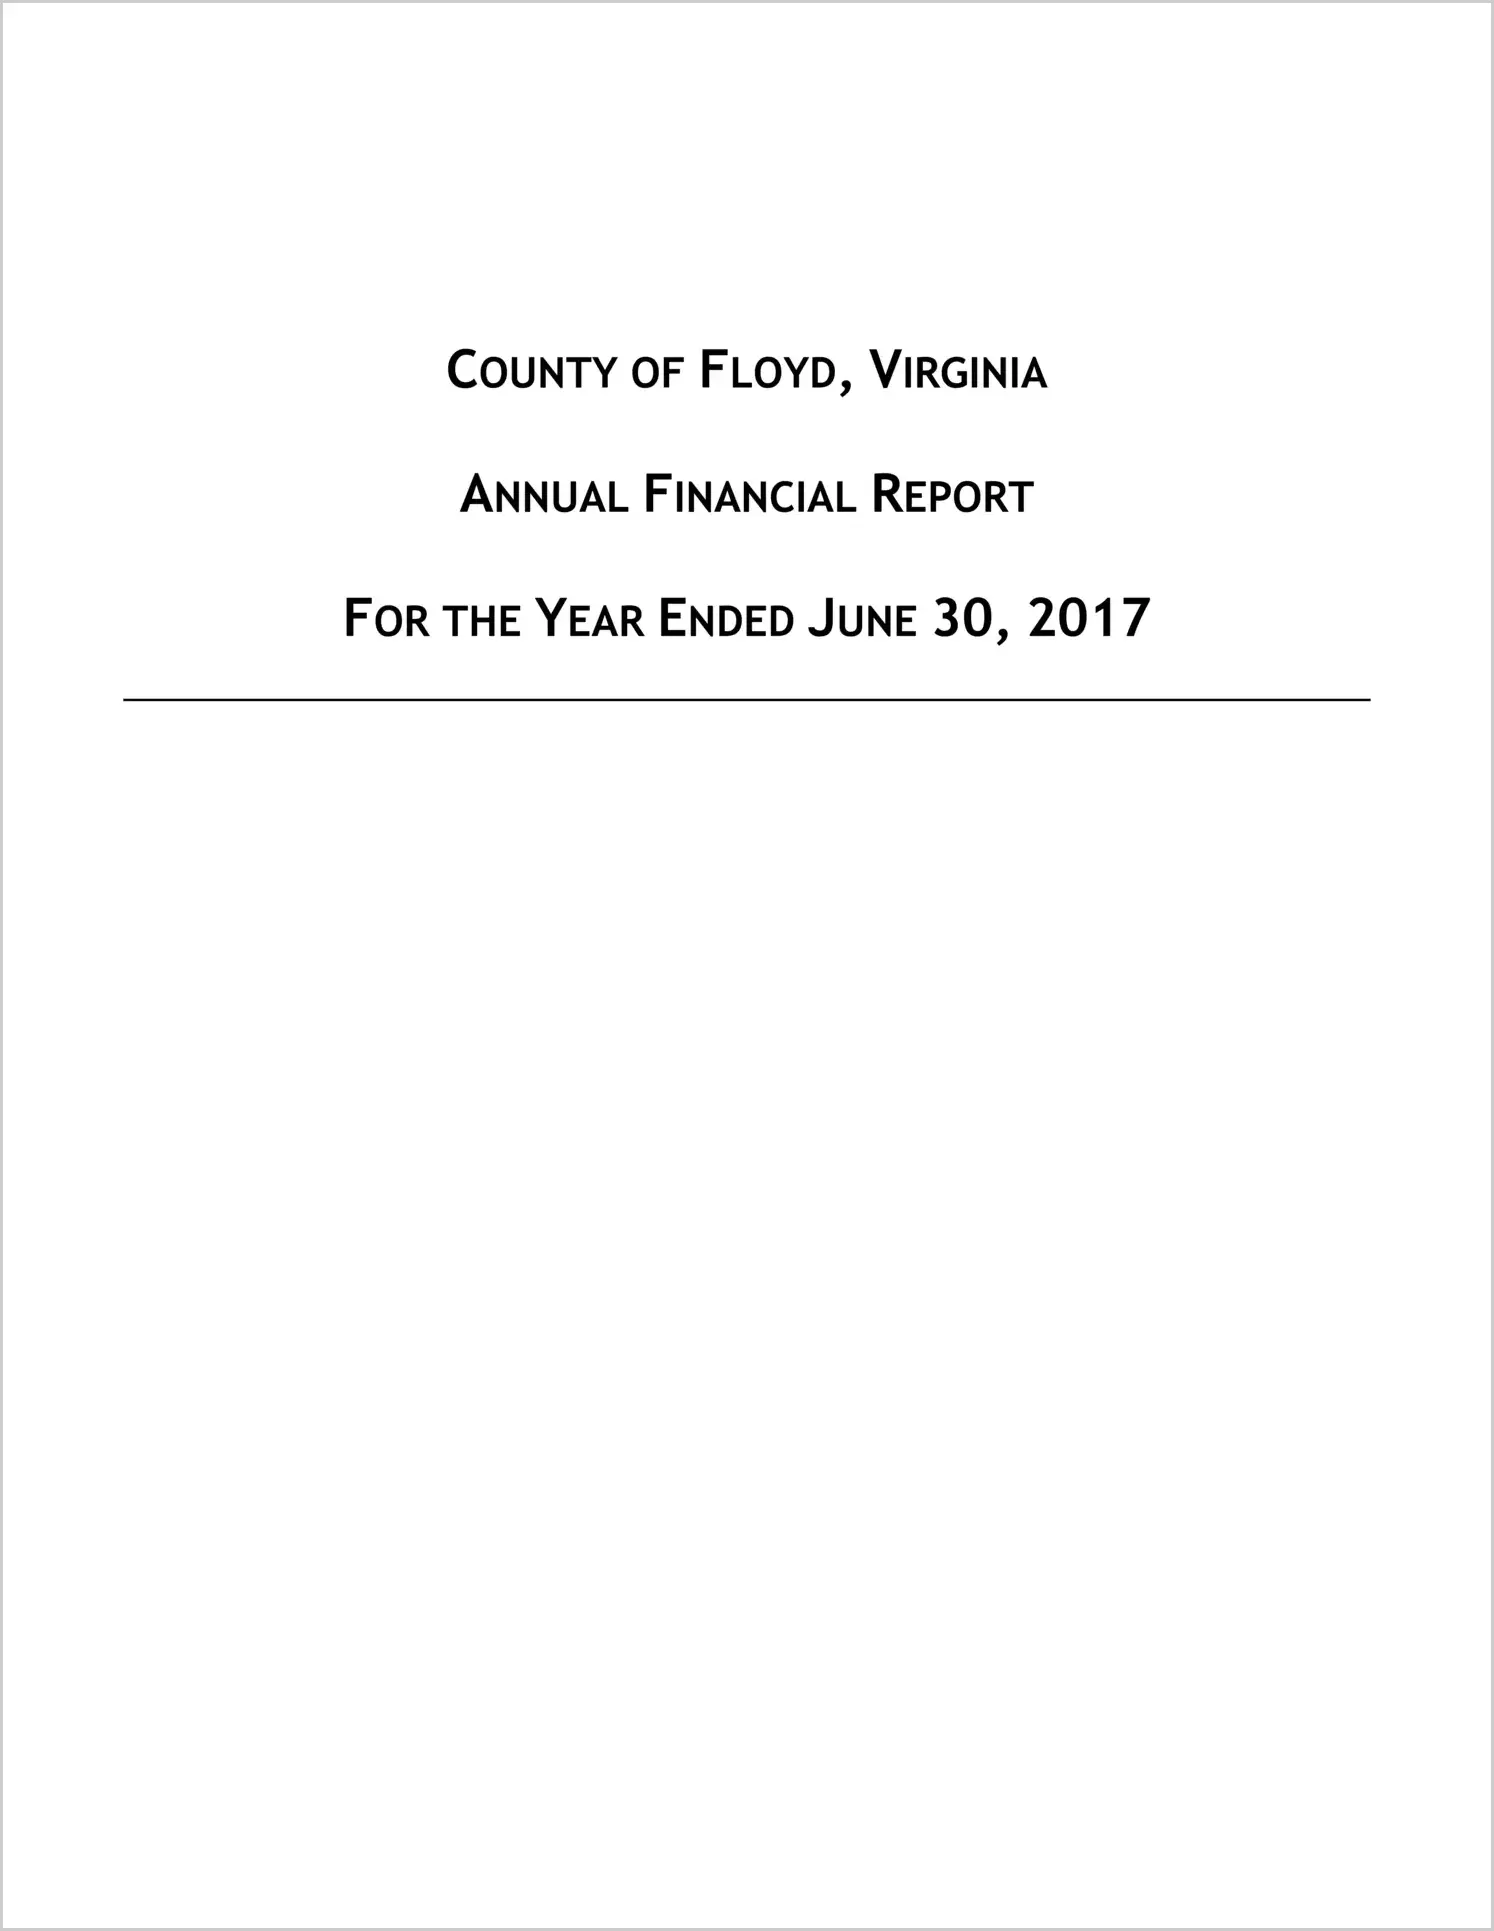 2017 Annual Financial Report for County of Floyd